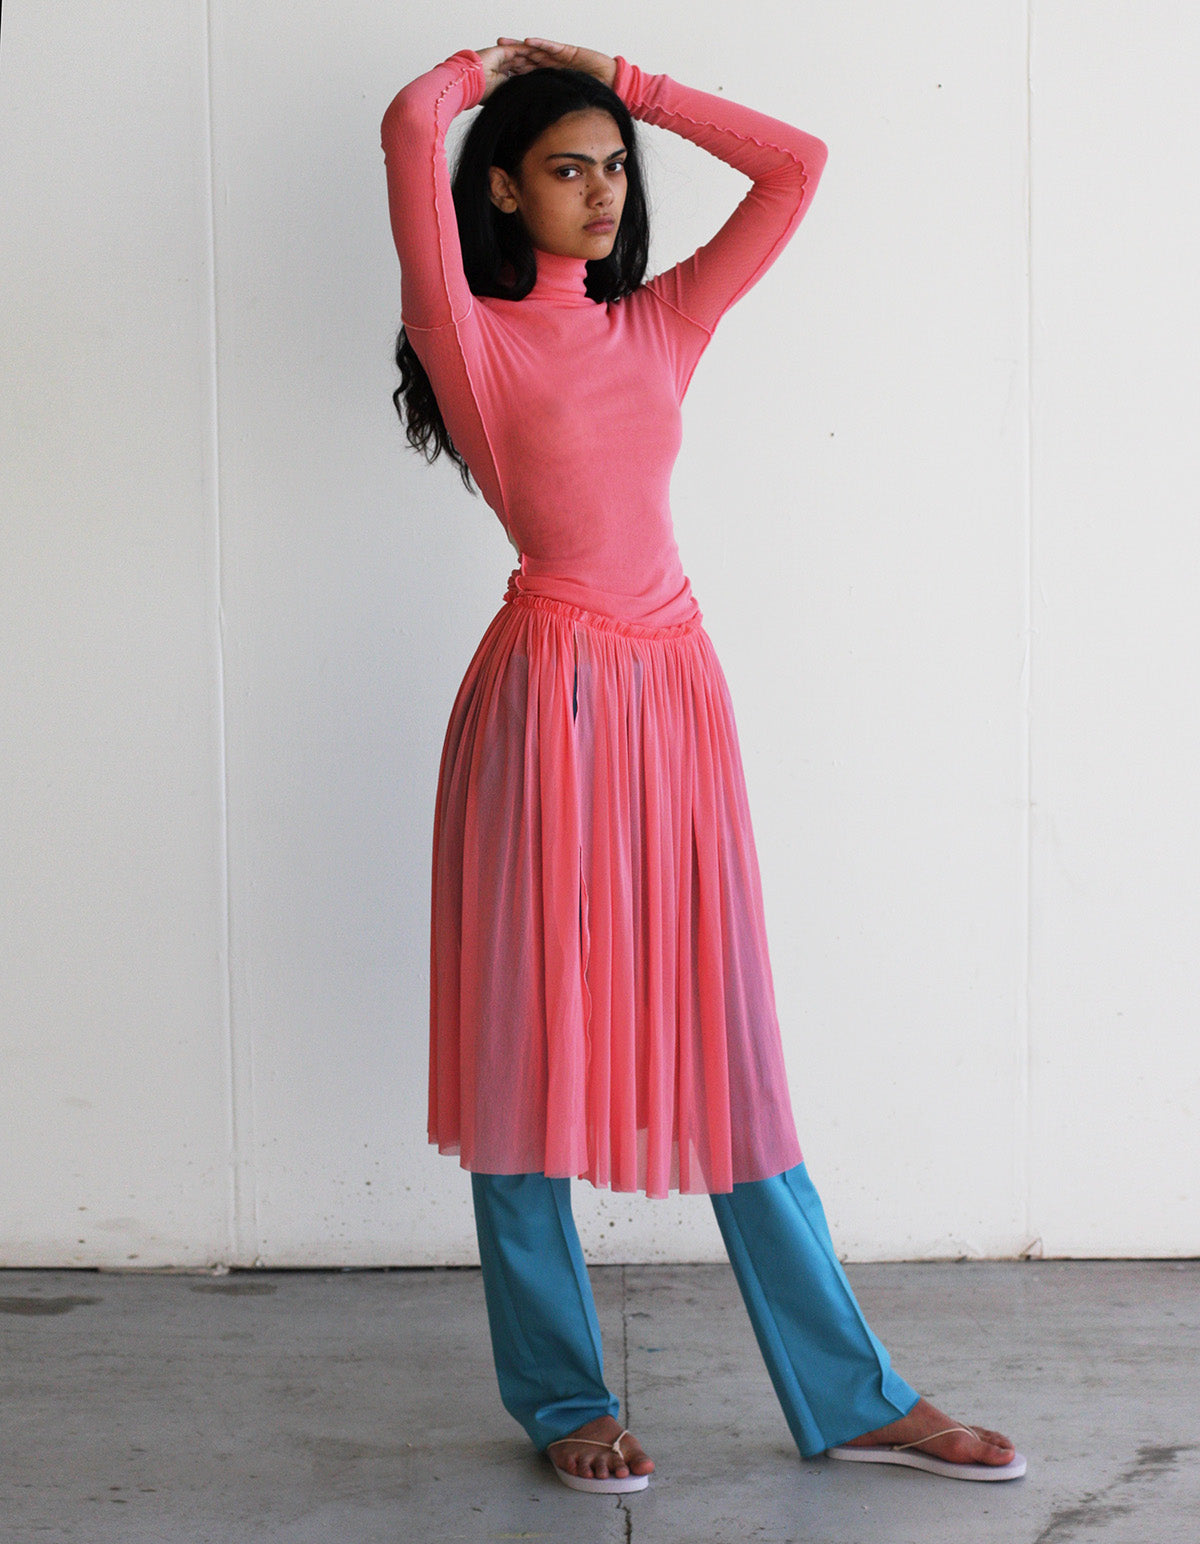 LOOK 6 (PINK ROSAS DRESS & BABYBLUE TAILORED WORKTROUSERS)